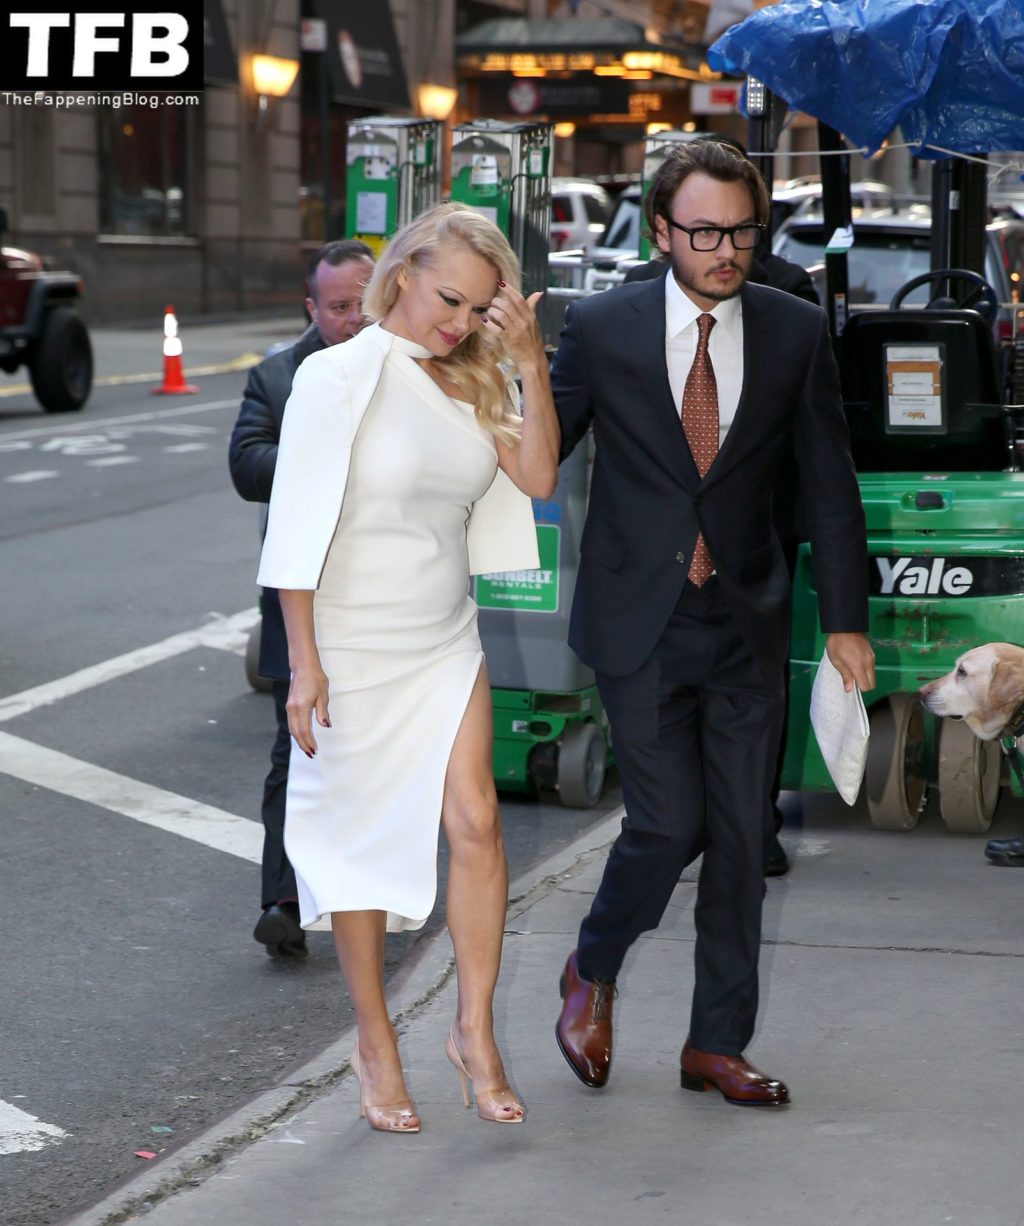 Pamela Anderson Sexy The Fappening Blog 47 1024x1226 - Pamela Anderson Heads to Good Morning America (107 Photos + Video)